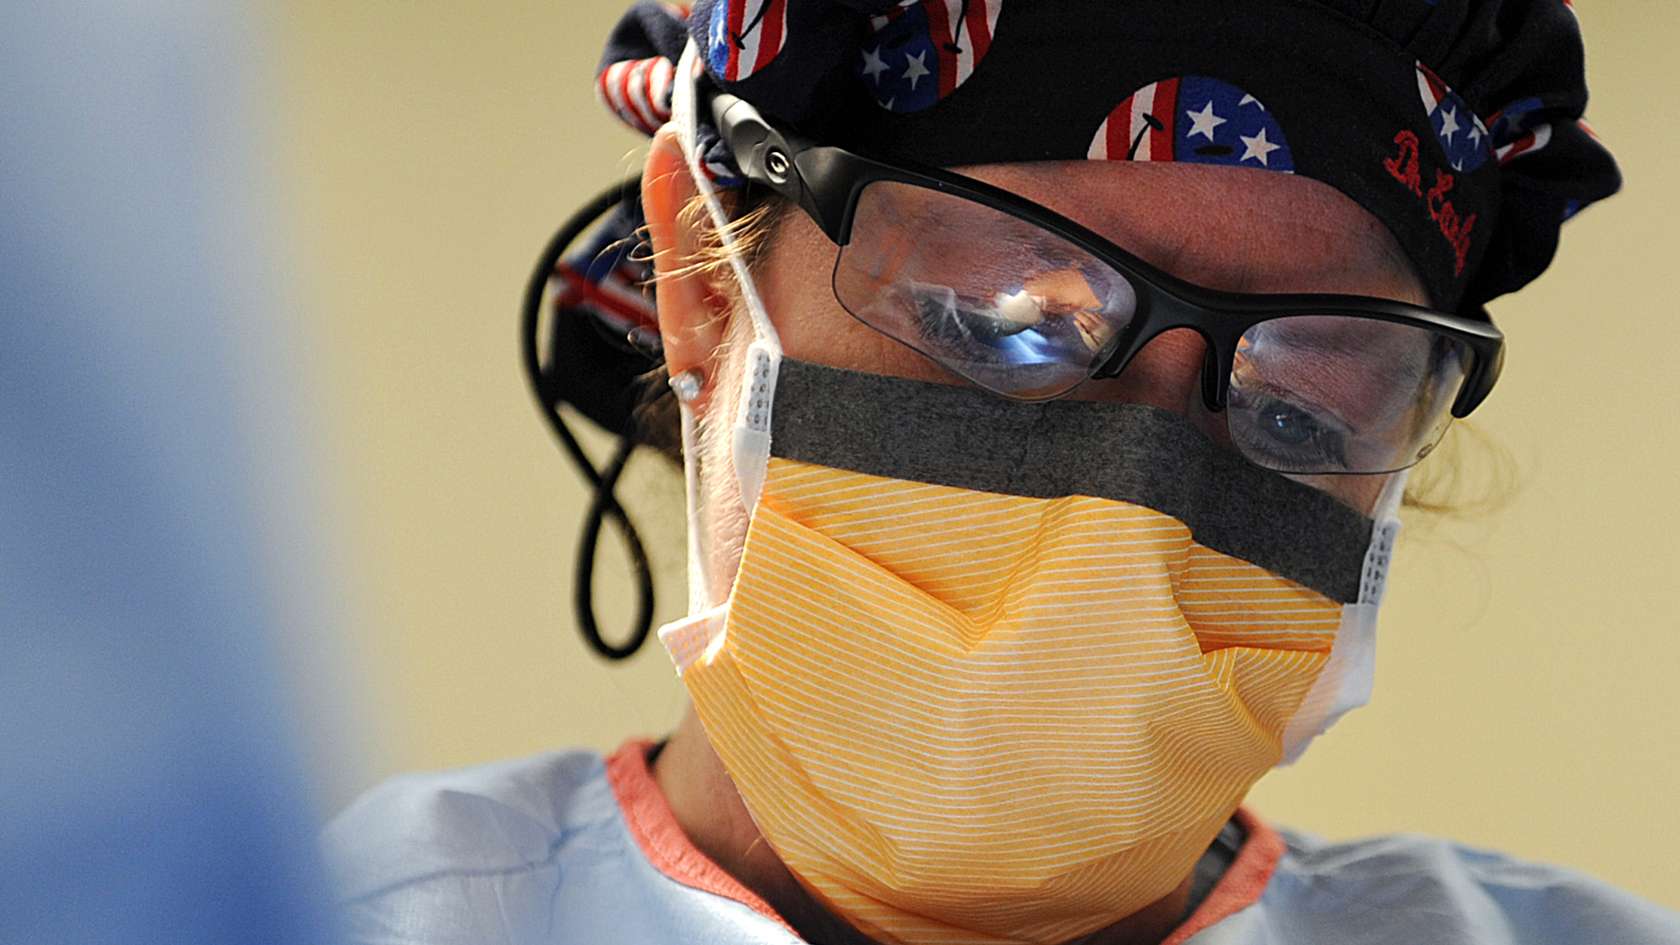 airman wearing protective glasses and mask